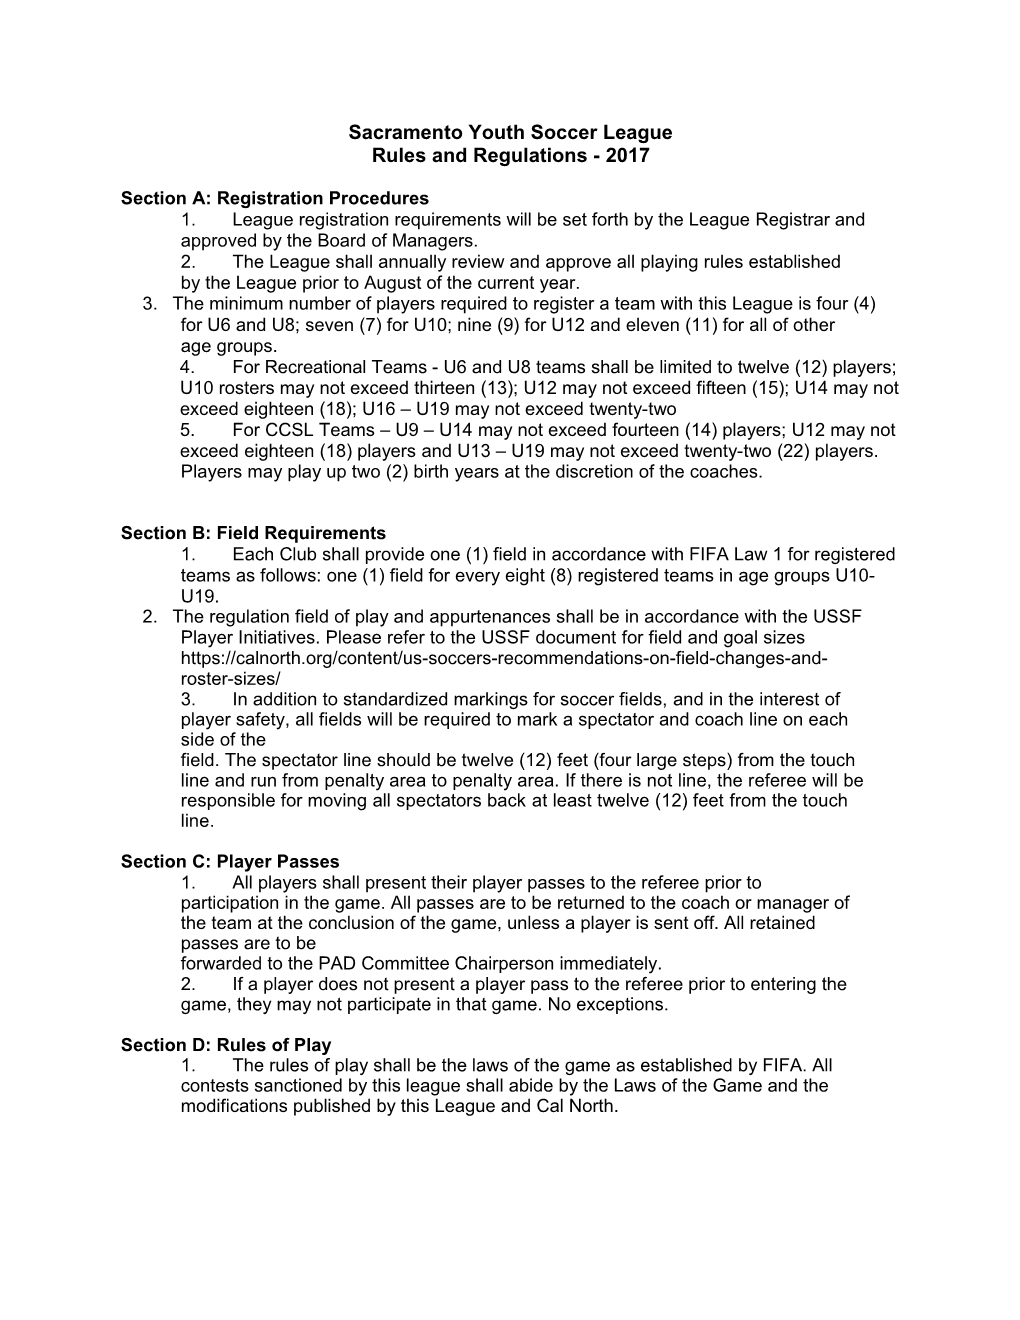 Sacramento Youth Soccer League Rules and Regulations-2017